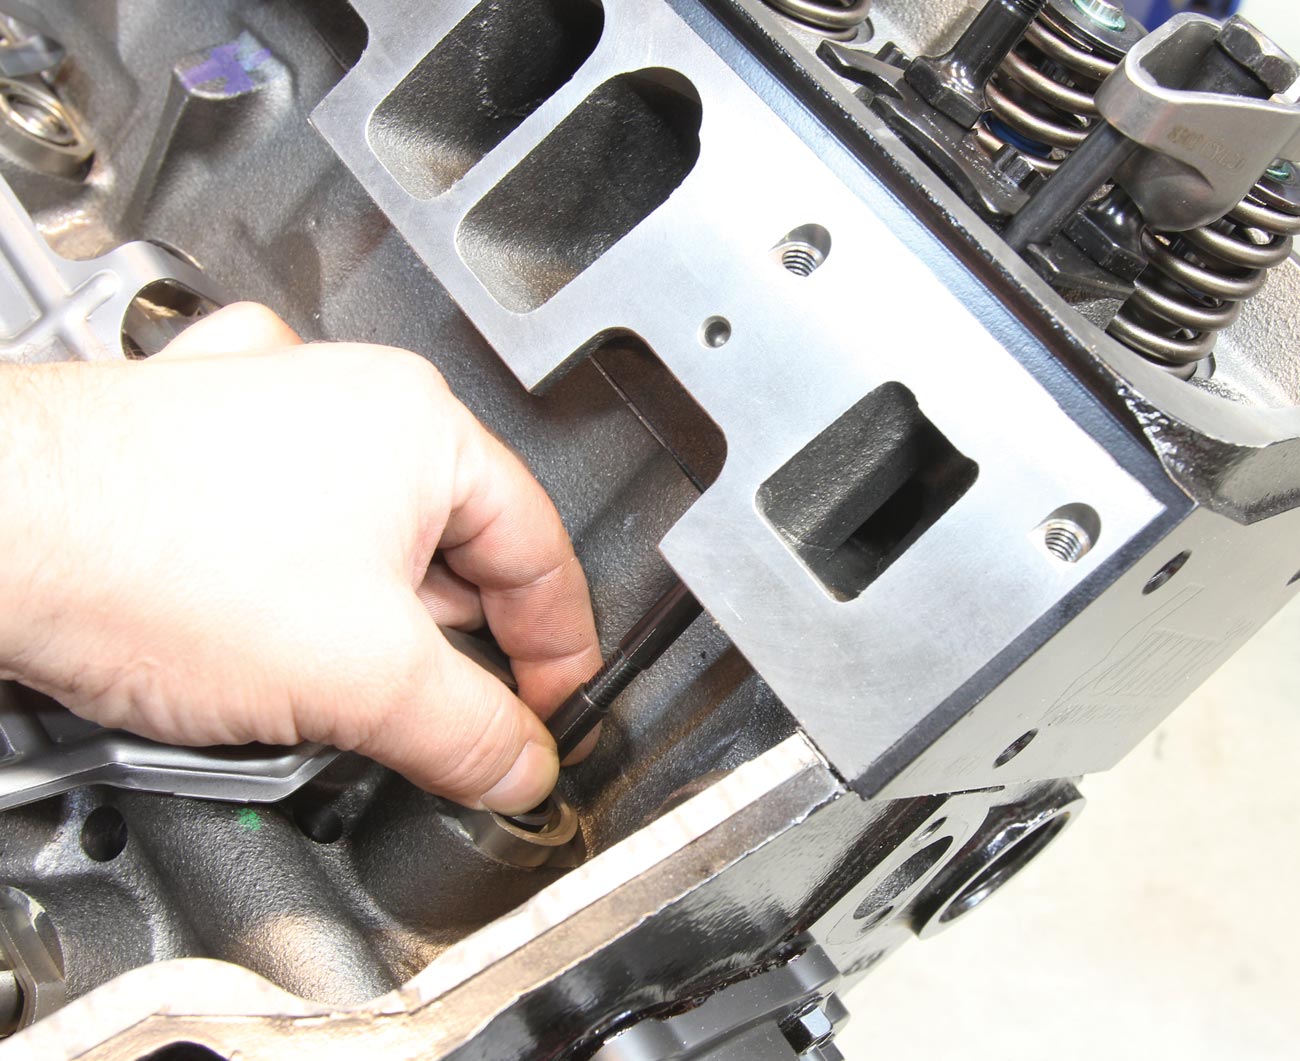 with one cylinder head torqued in place, one of the adjustable pushrods is installed along with the rocker arm